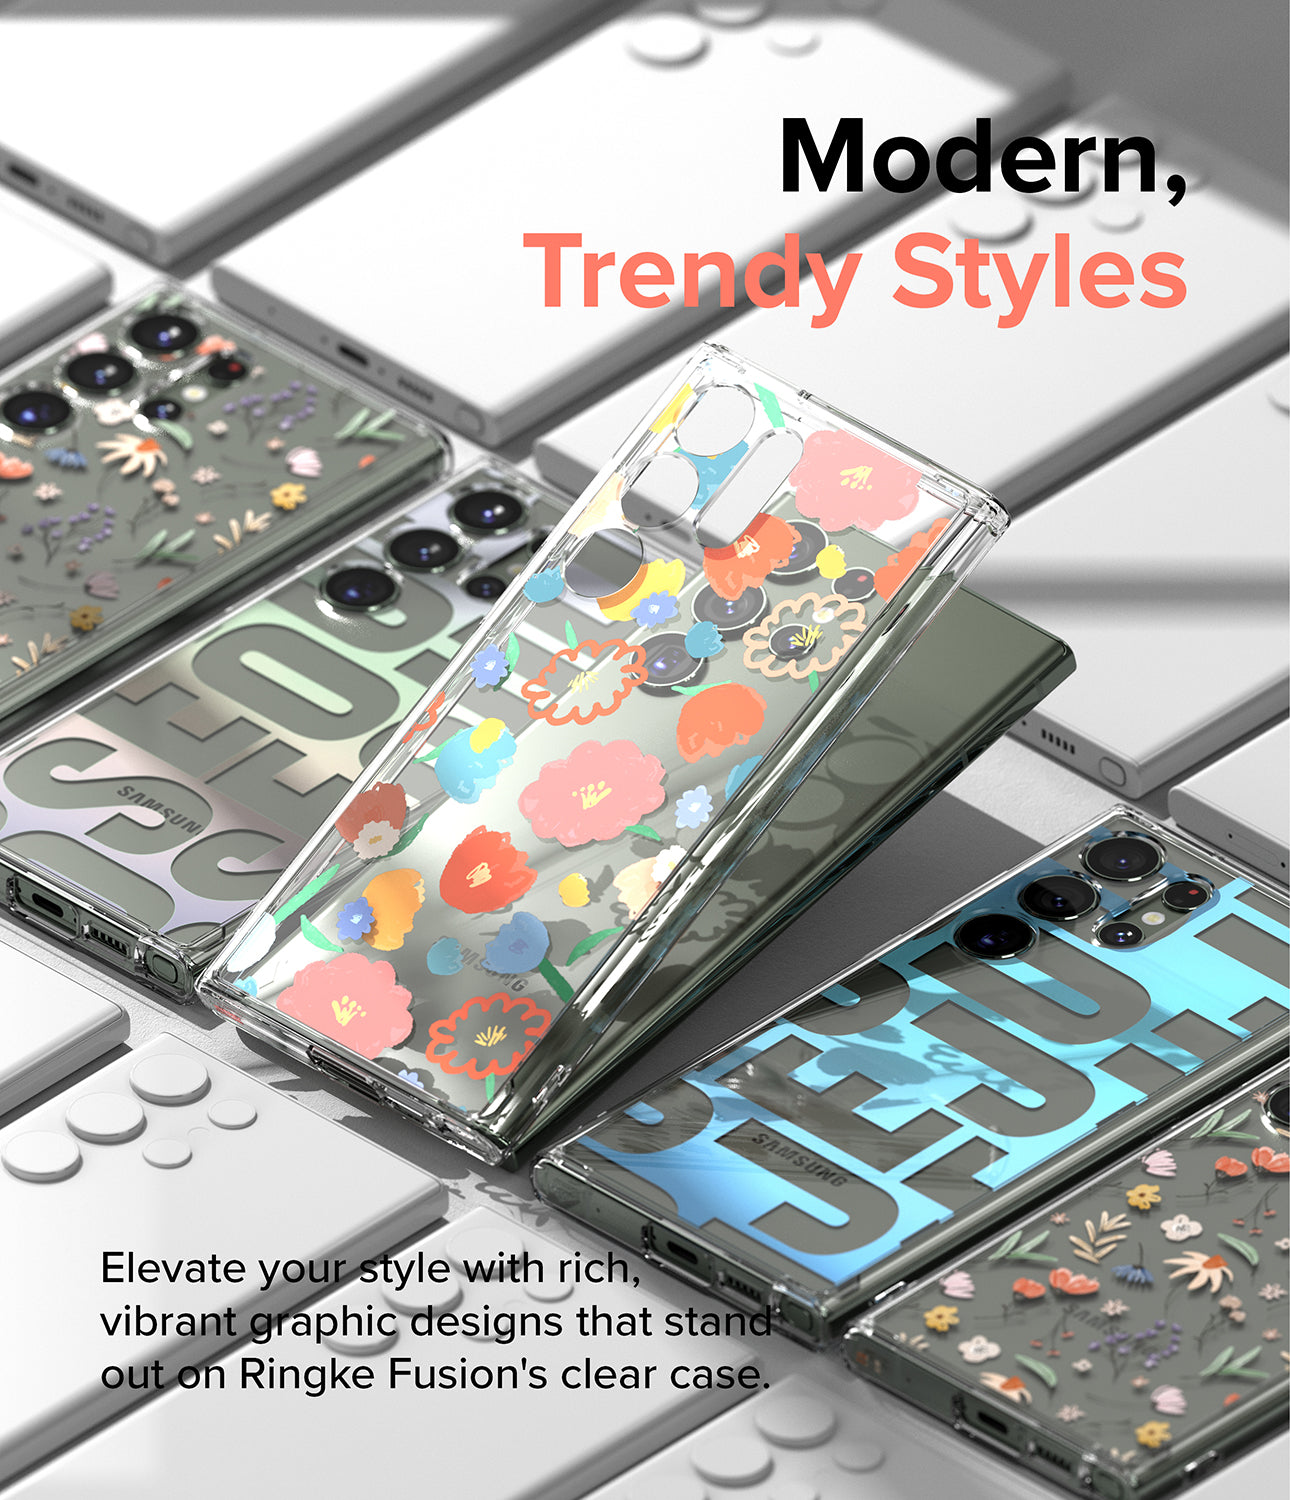 Galaxy S23 Ultra Case | Fusion Design Floral - Modern Trendy Styles